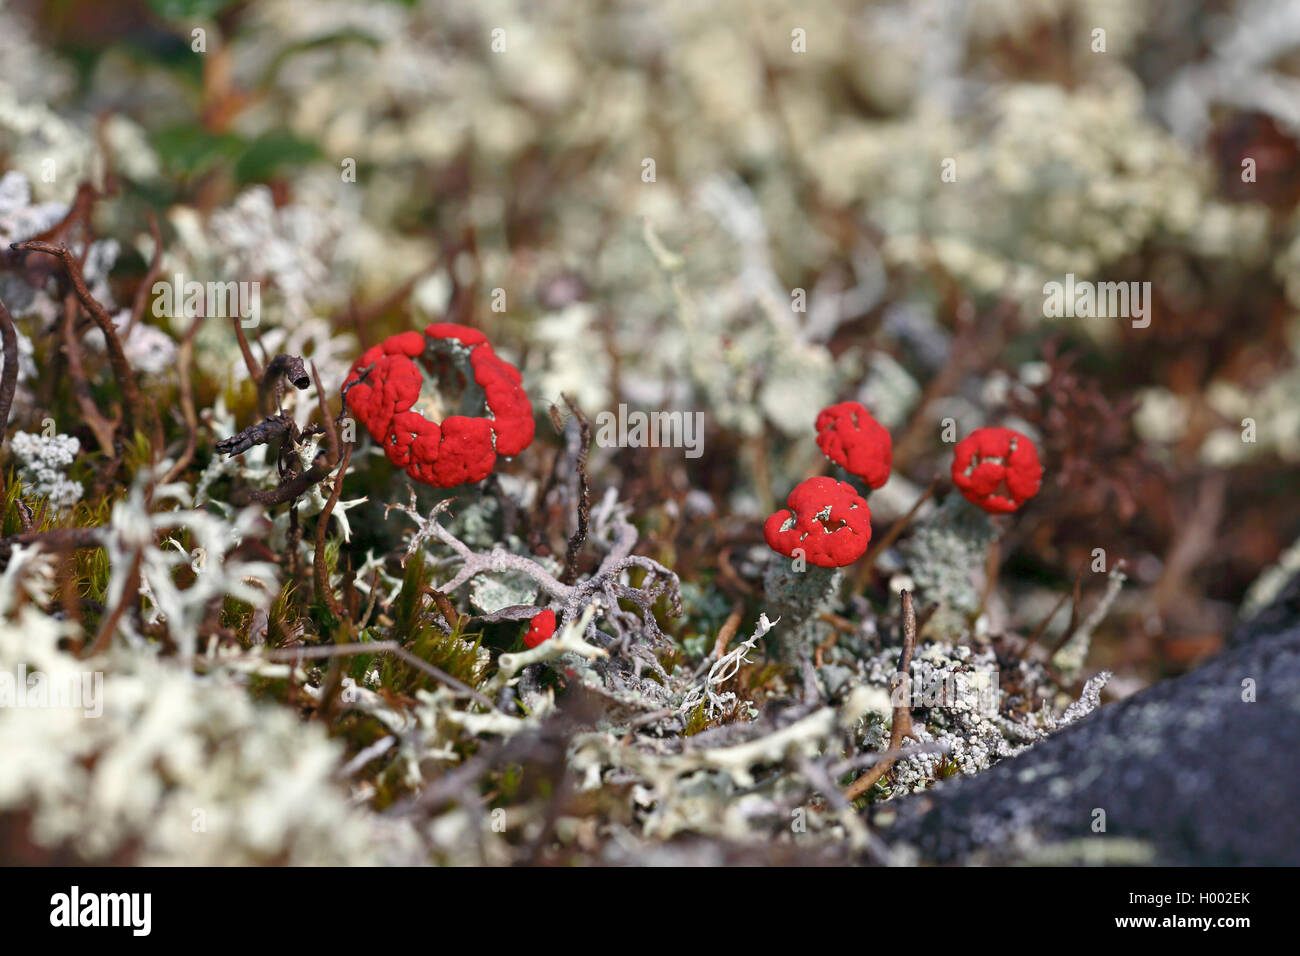 cup lichen (Cladonia spec,), with red fruiting bodies, Sweden, Gaellivare Stock Photo